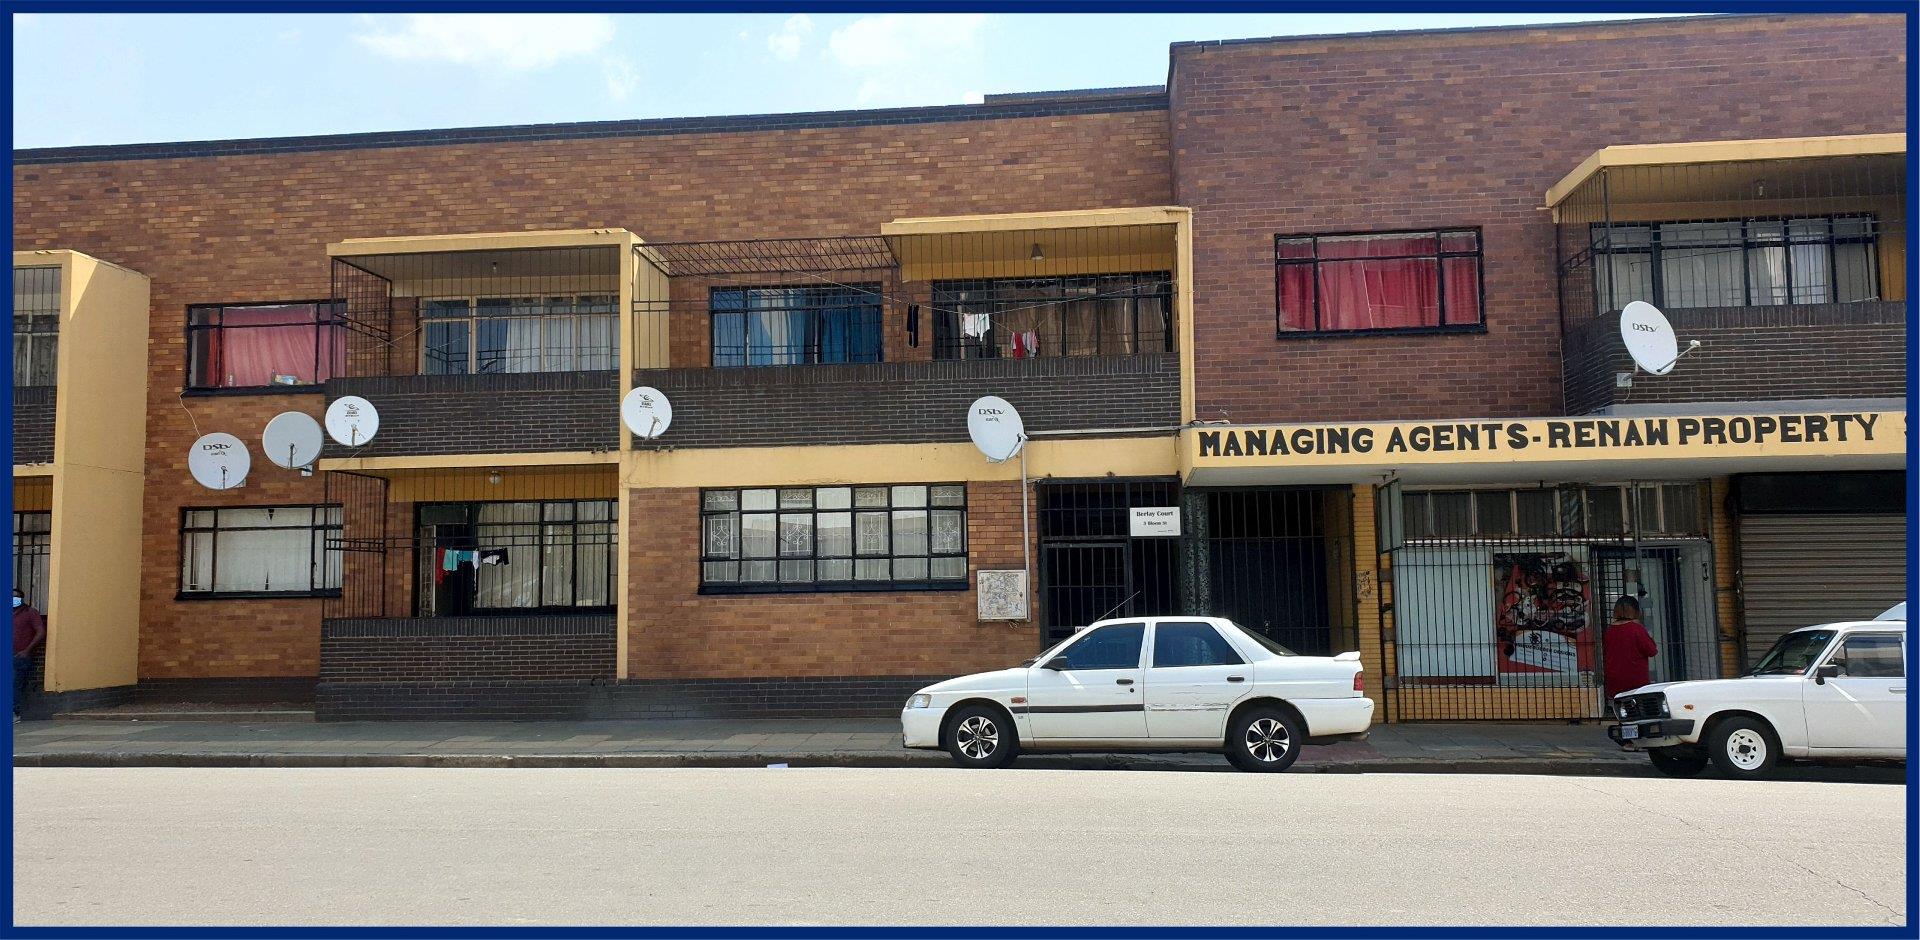 East Rand Property : Apartment / flat to rent in East Rand : Property24 ...